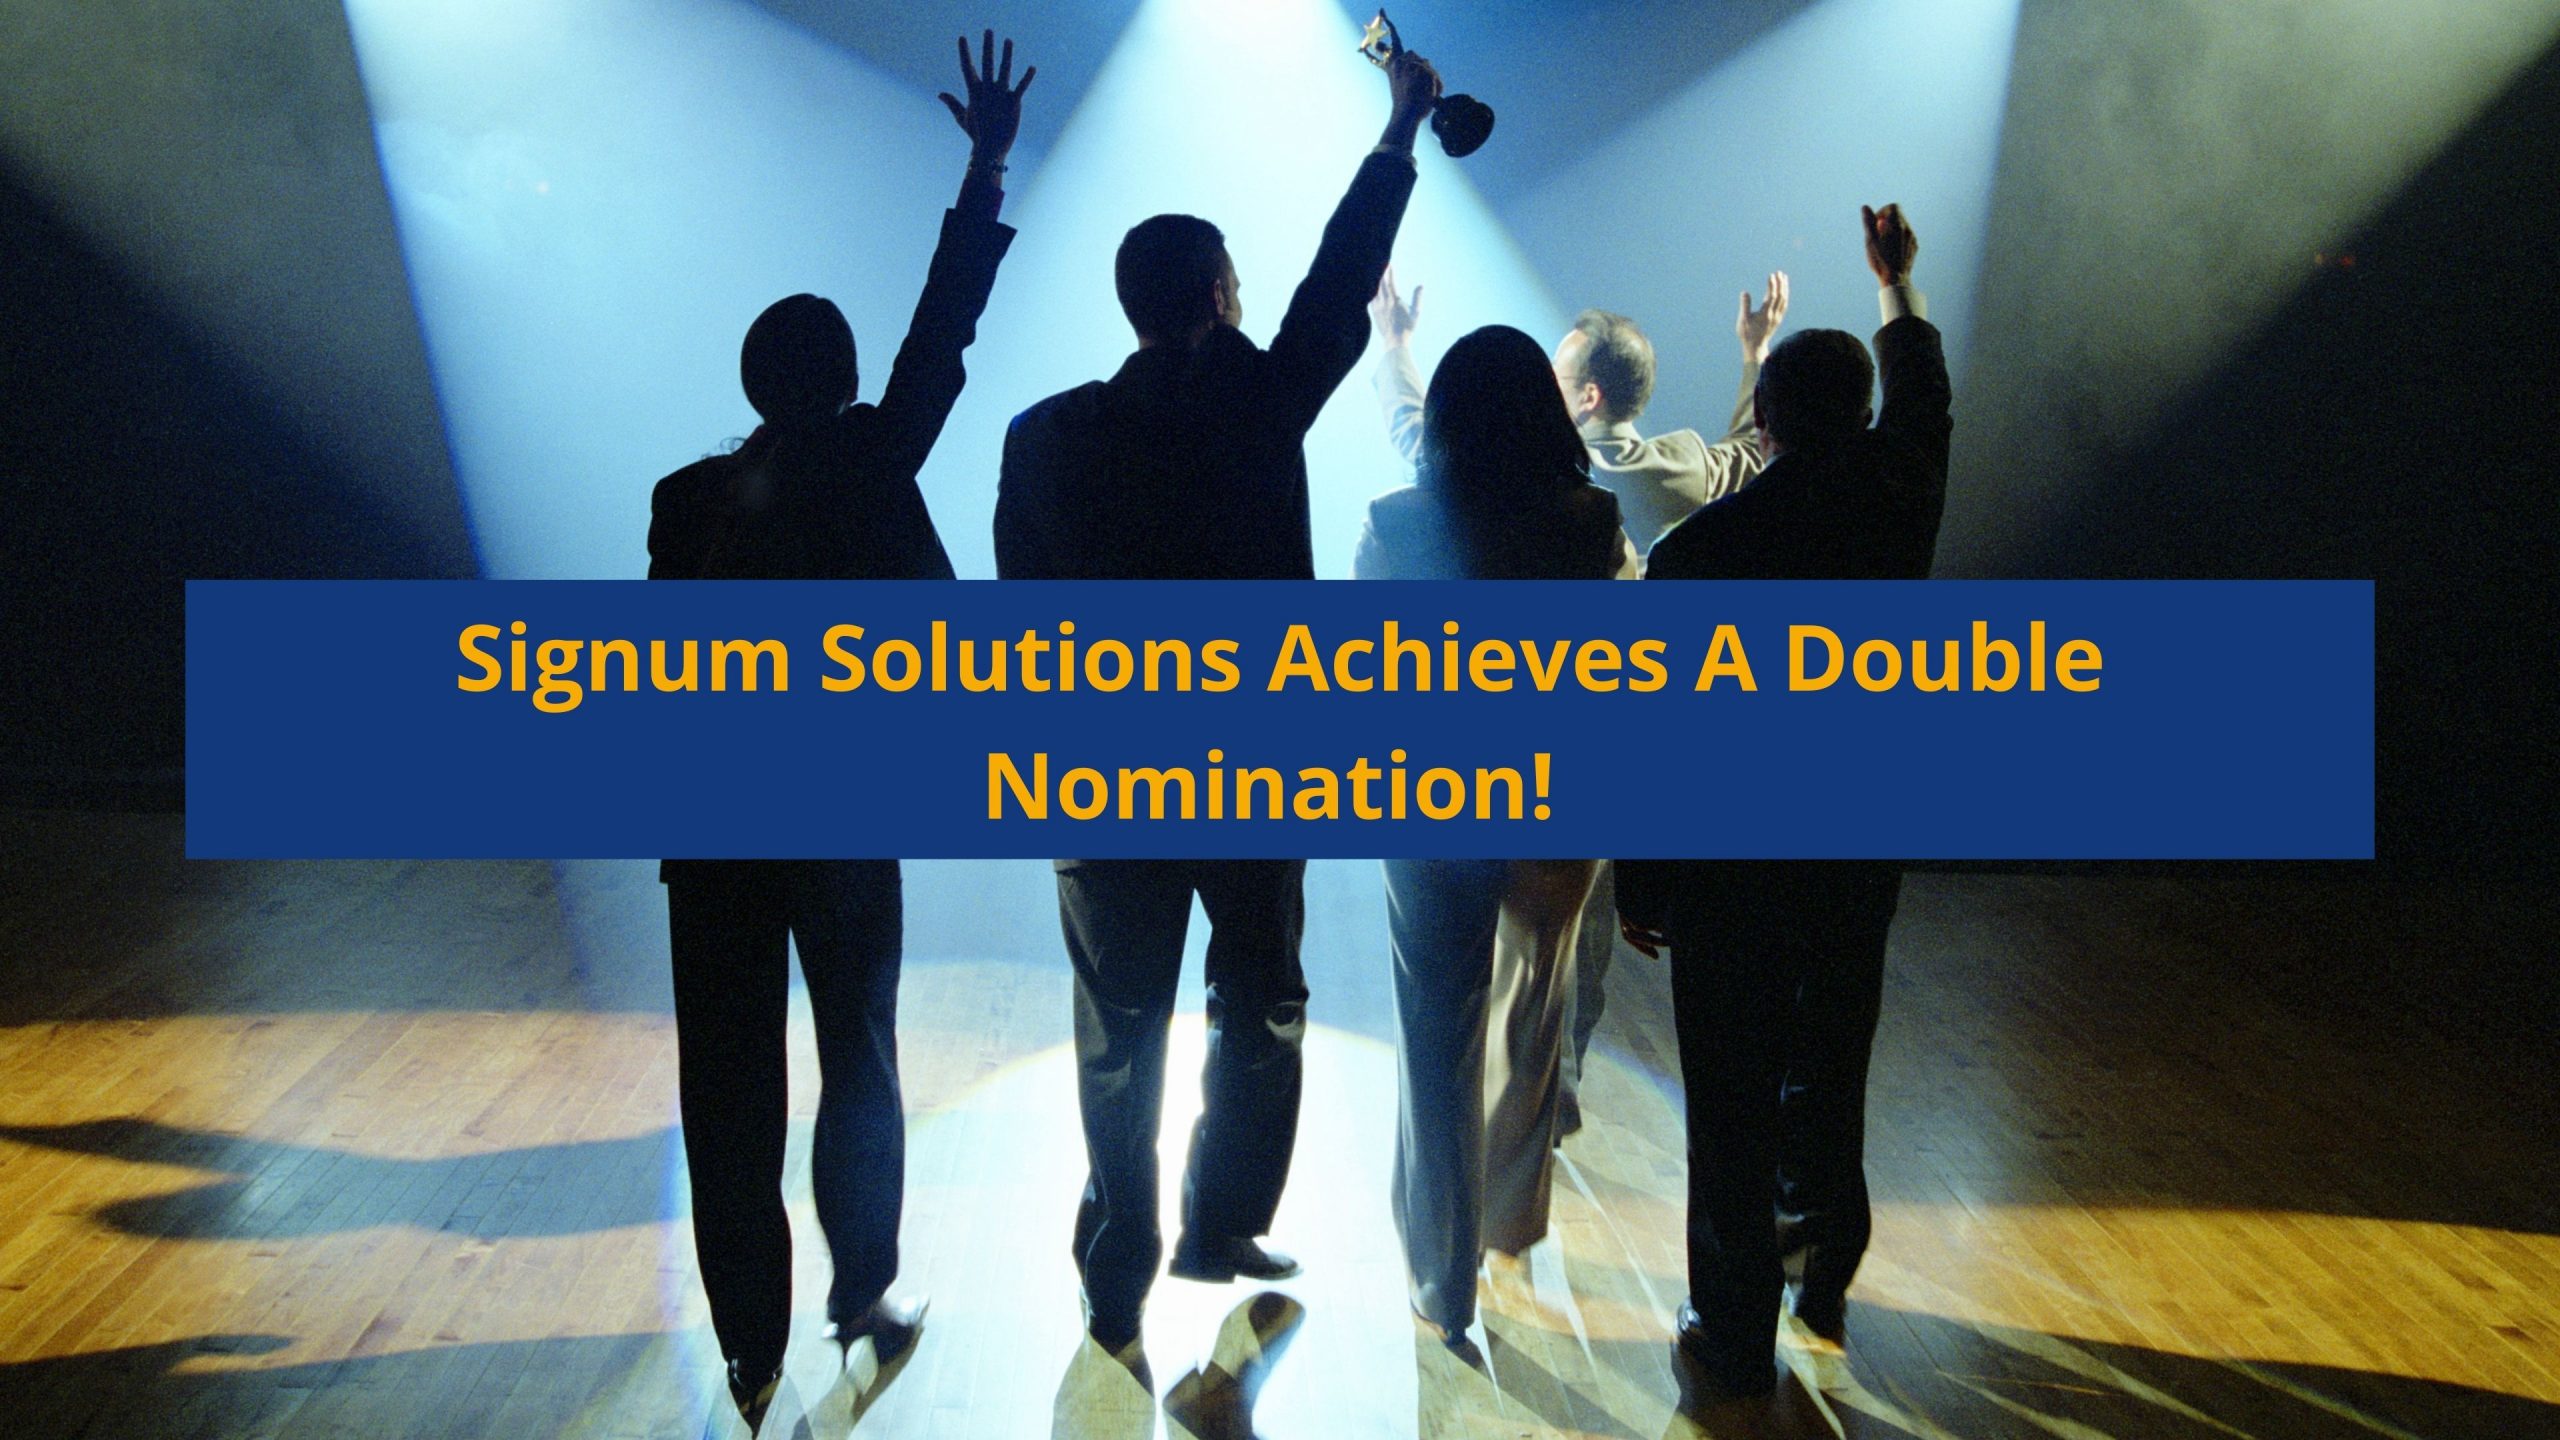 Signum Solutions Achieves A Double Nomination!